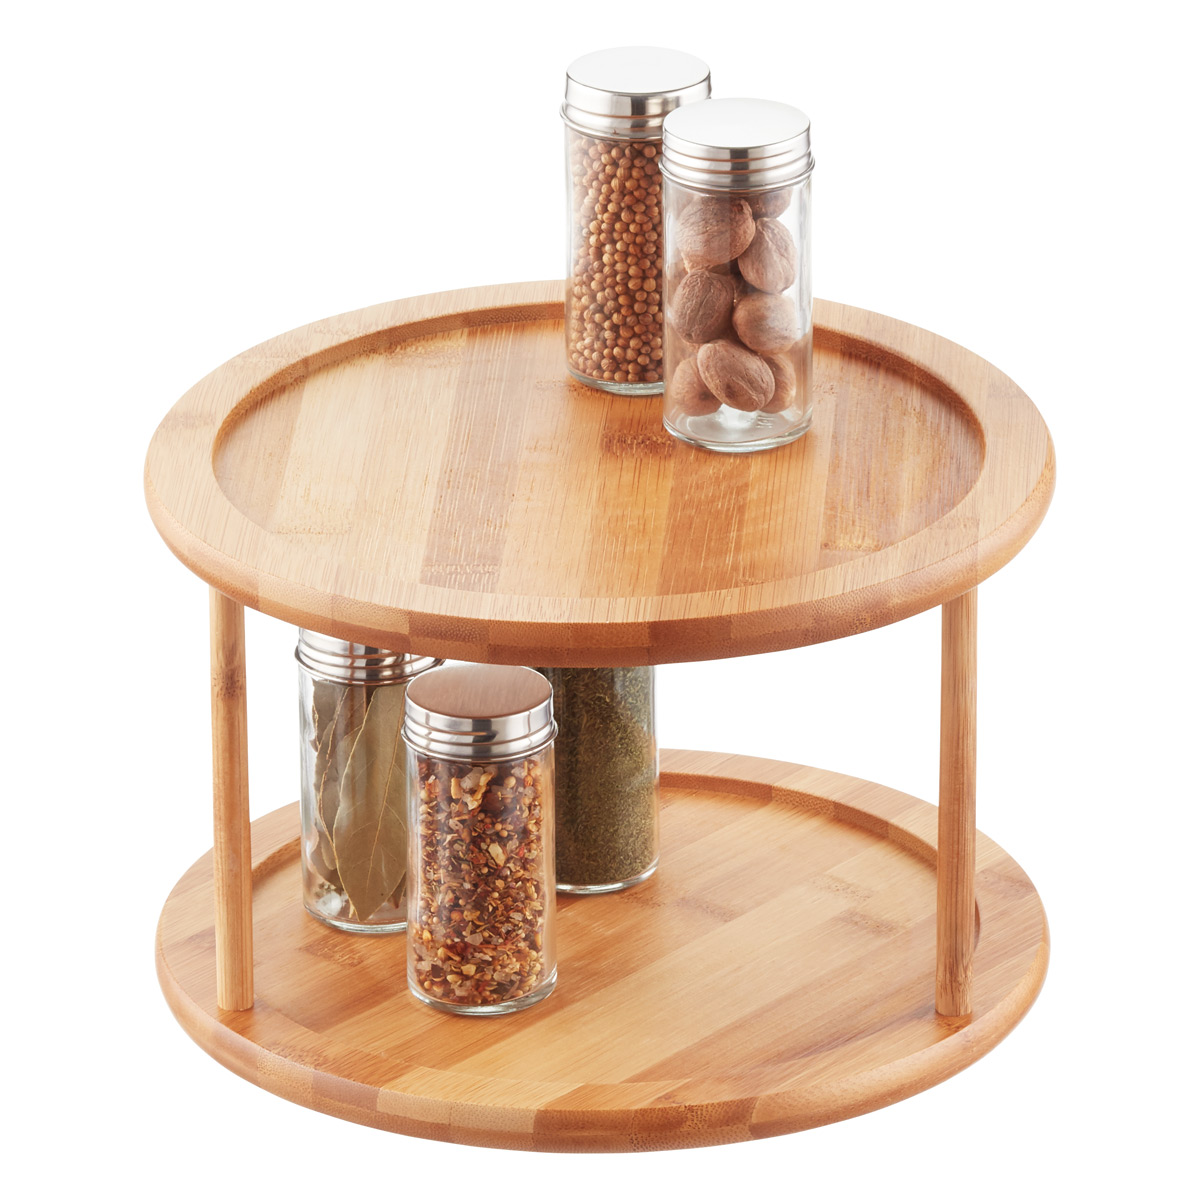 2 Tier lazy susan turntable for a spice organizer